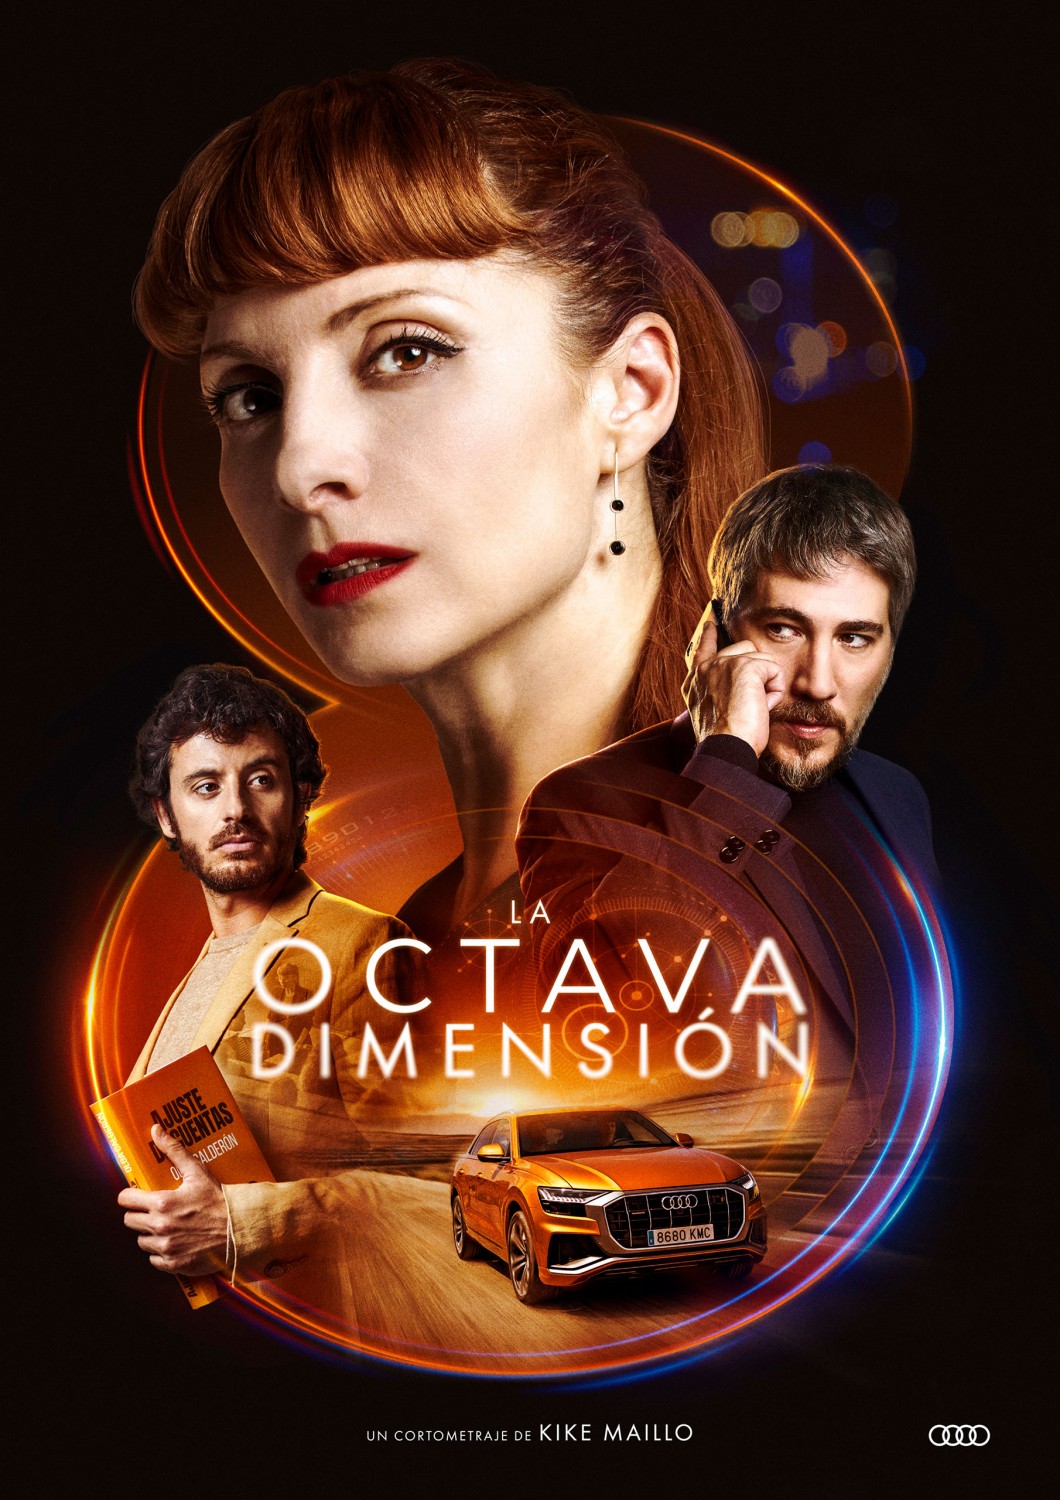 Extra Large Movie Poster Image for La octava dimensin